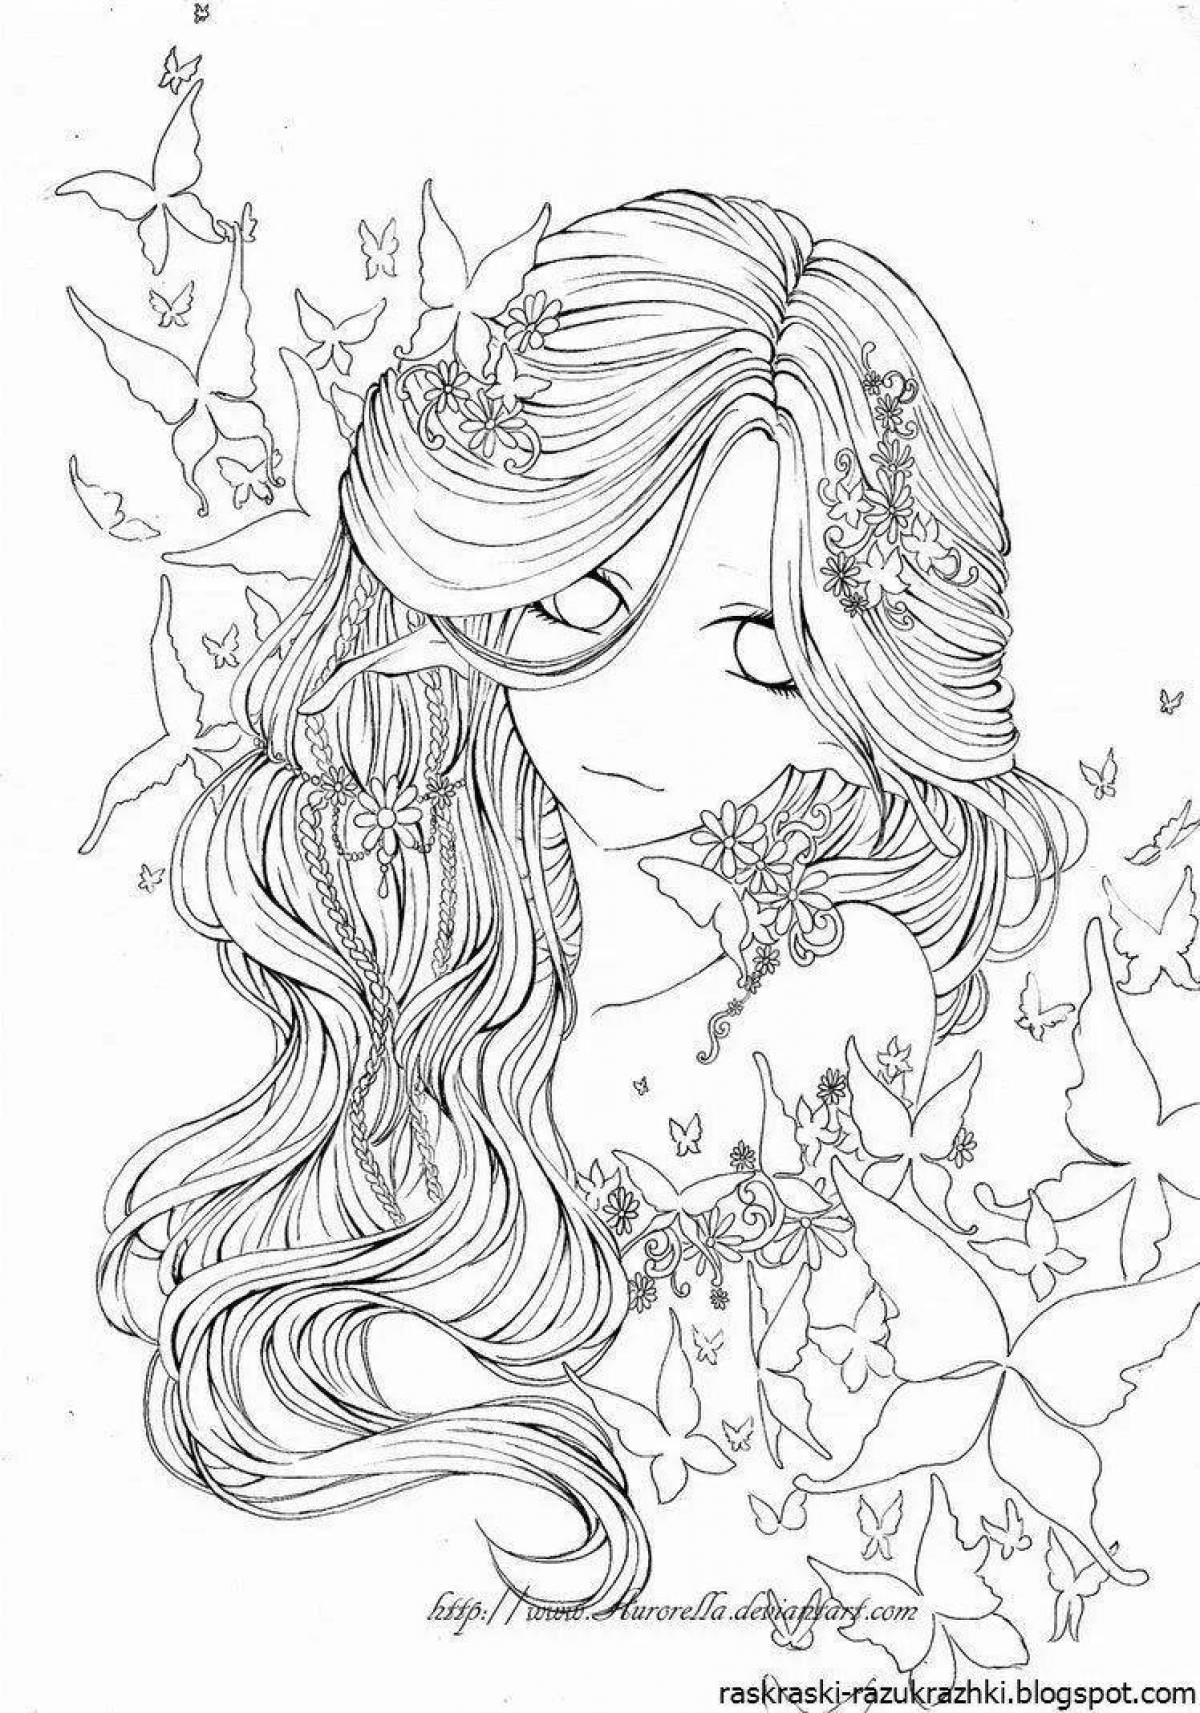 A wonderful coloring book for 11 years for girls difficult